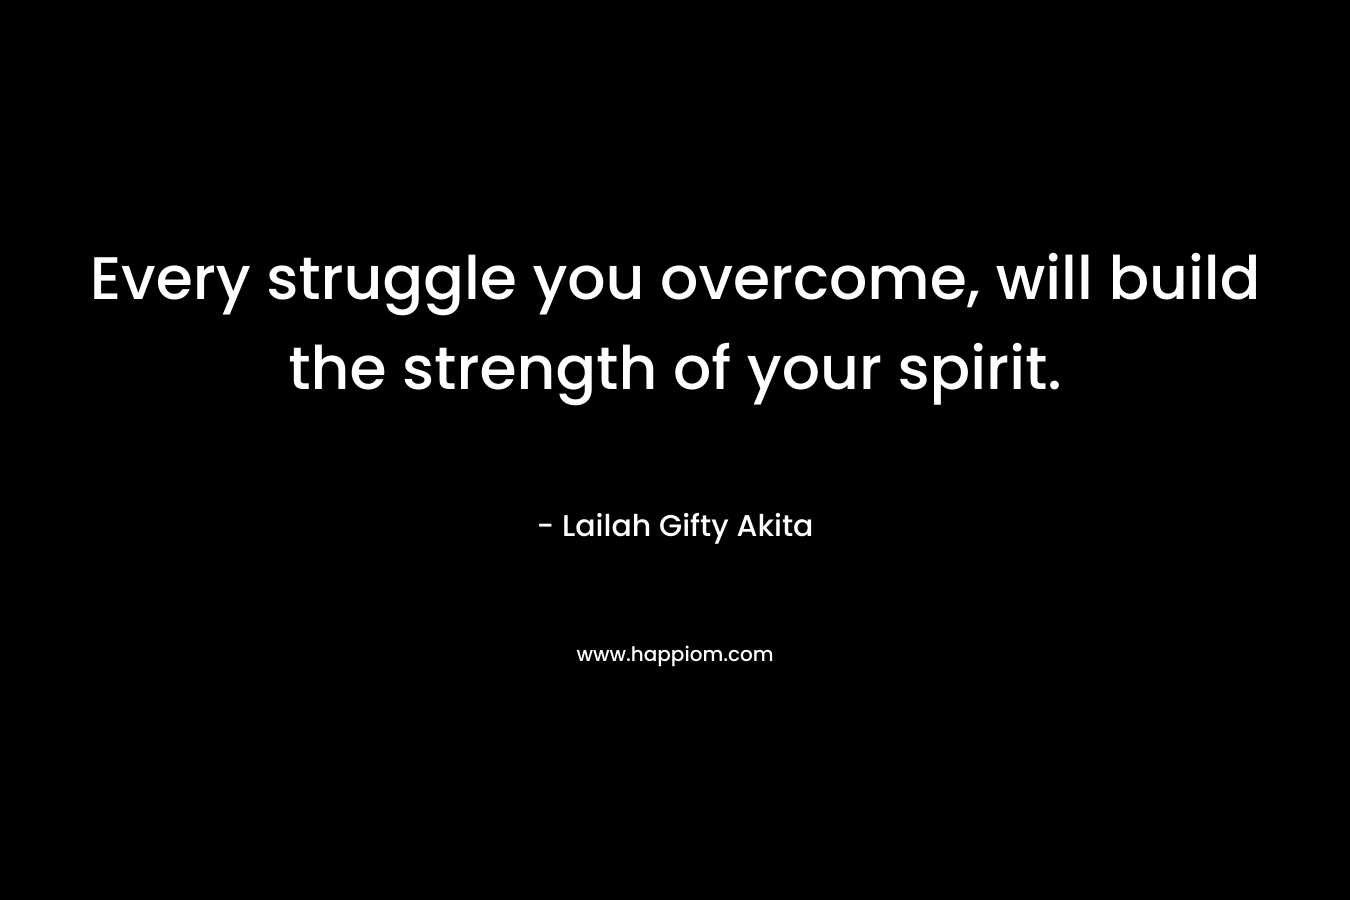 Every struggle you overcome, will build the strength of your spirit.